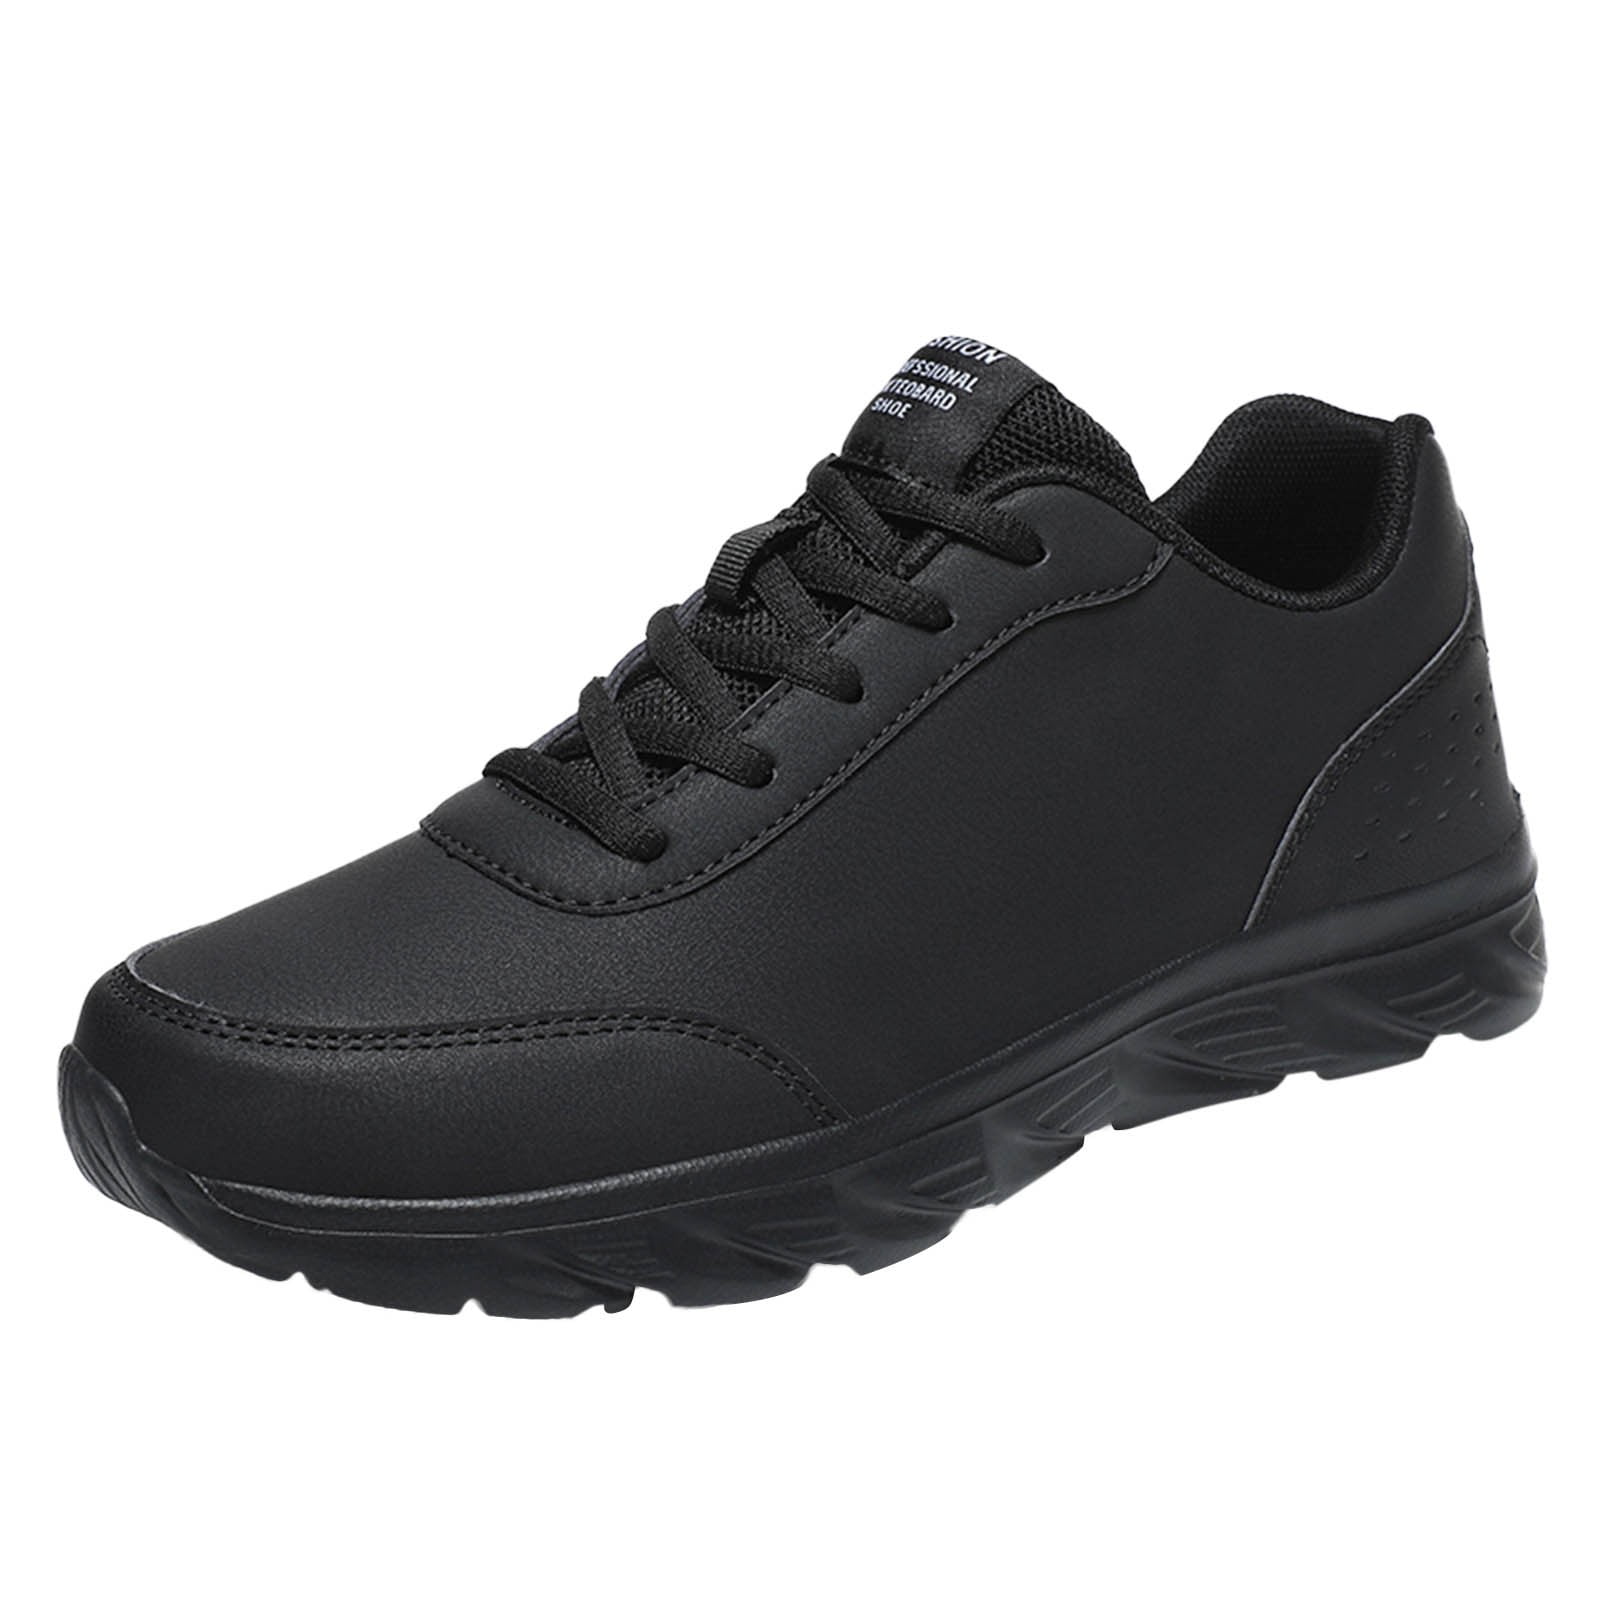 MEN SPORTS SHOES WITHOUT LACES, RUNIING SHOES, WALKING SHOES